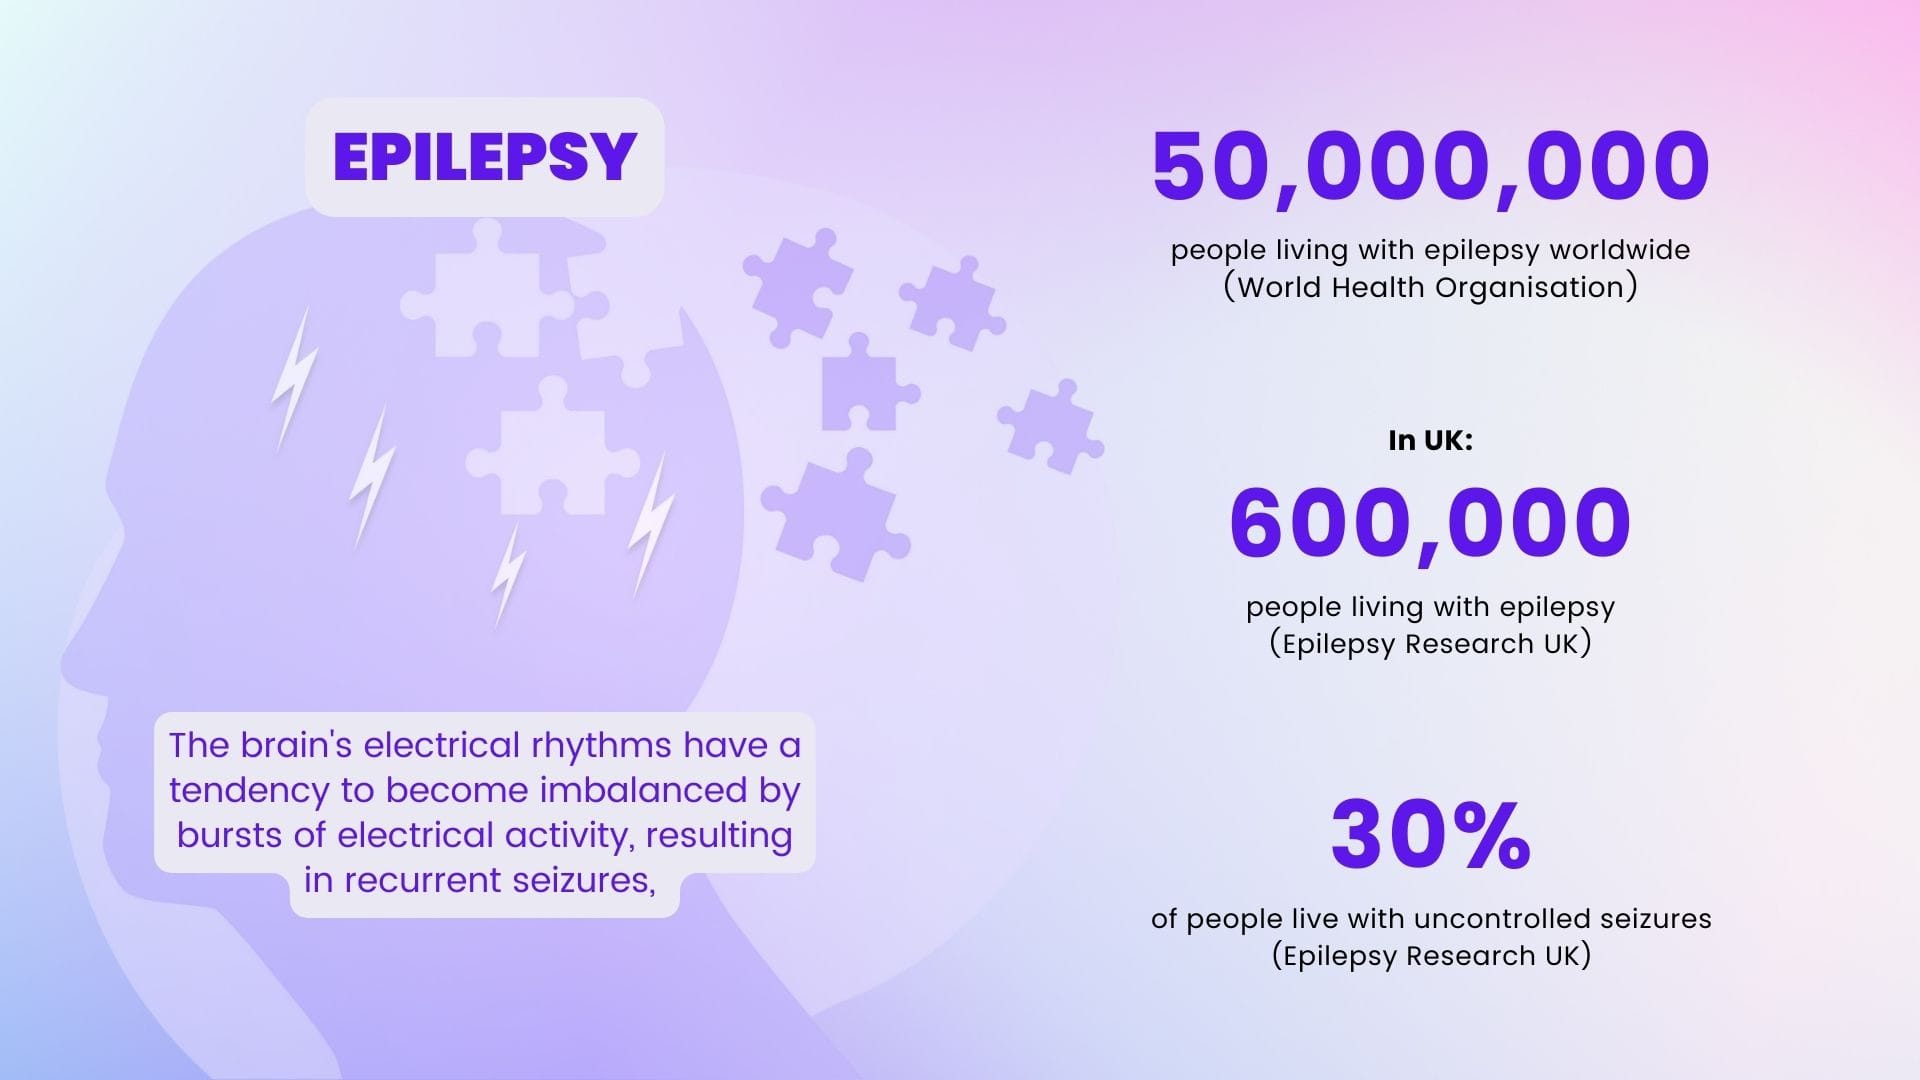 Data and facts about epilepsy